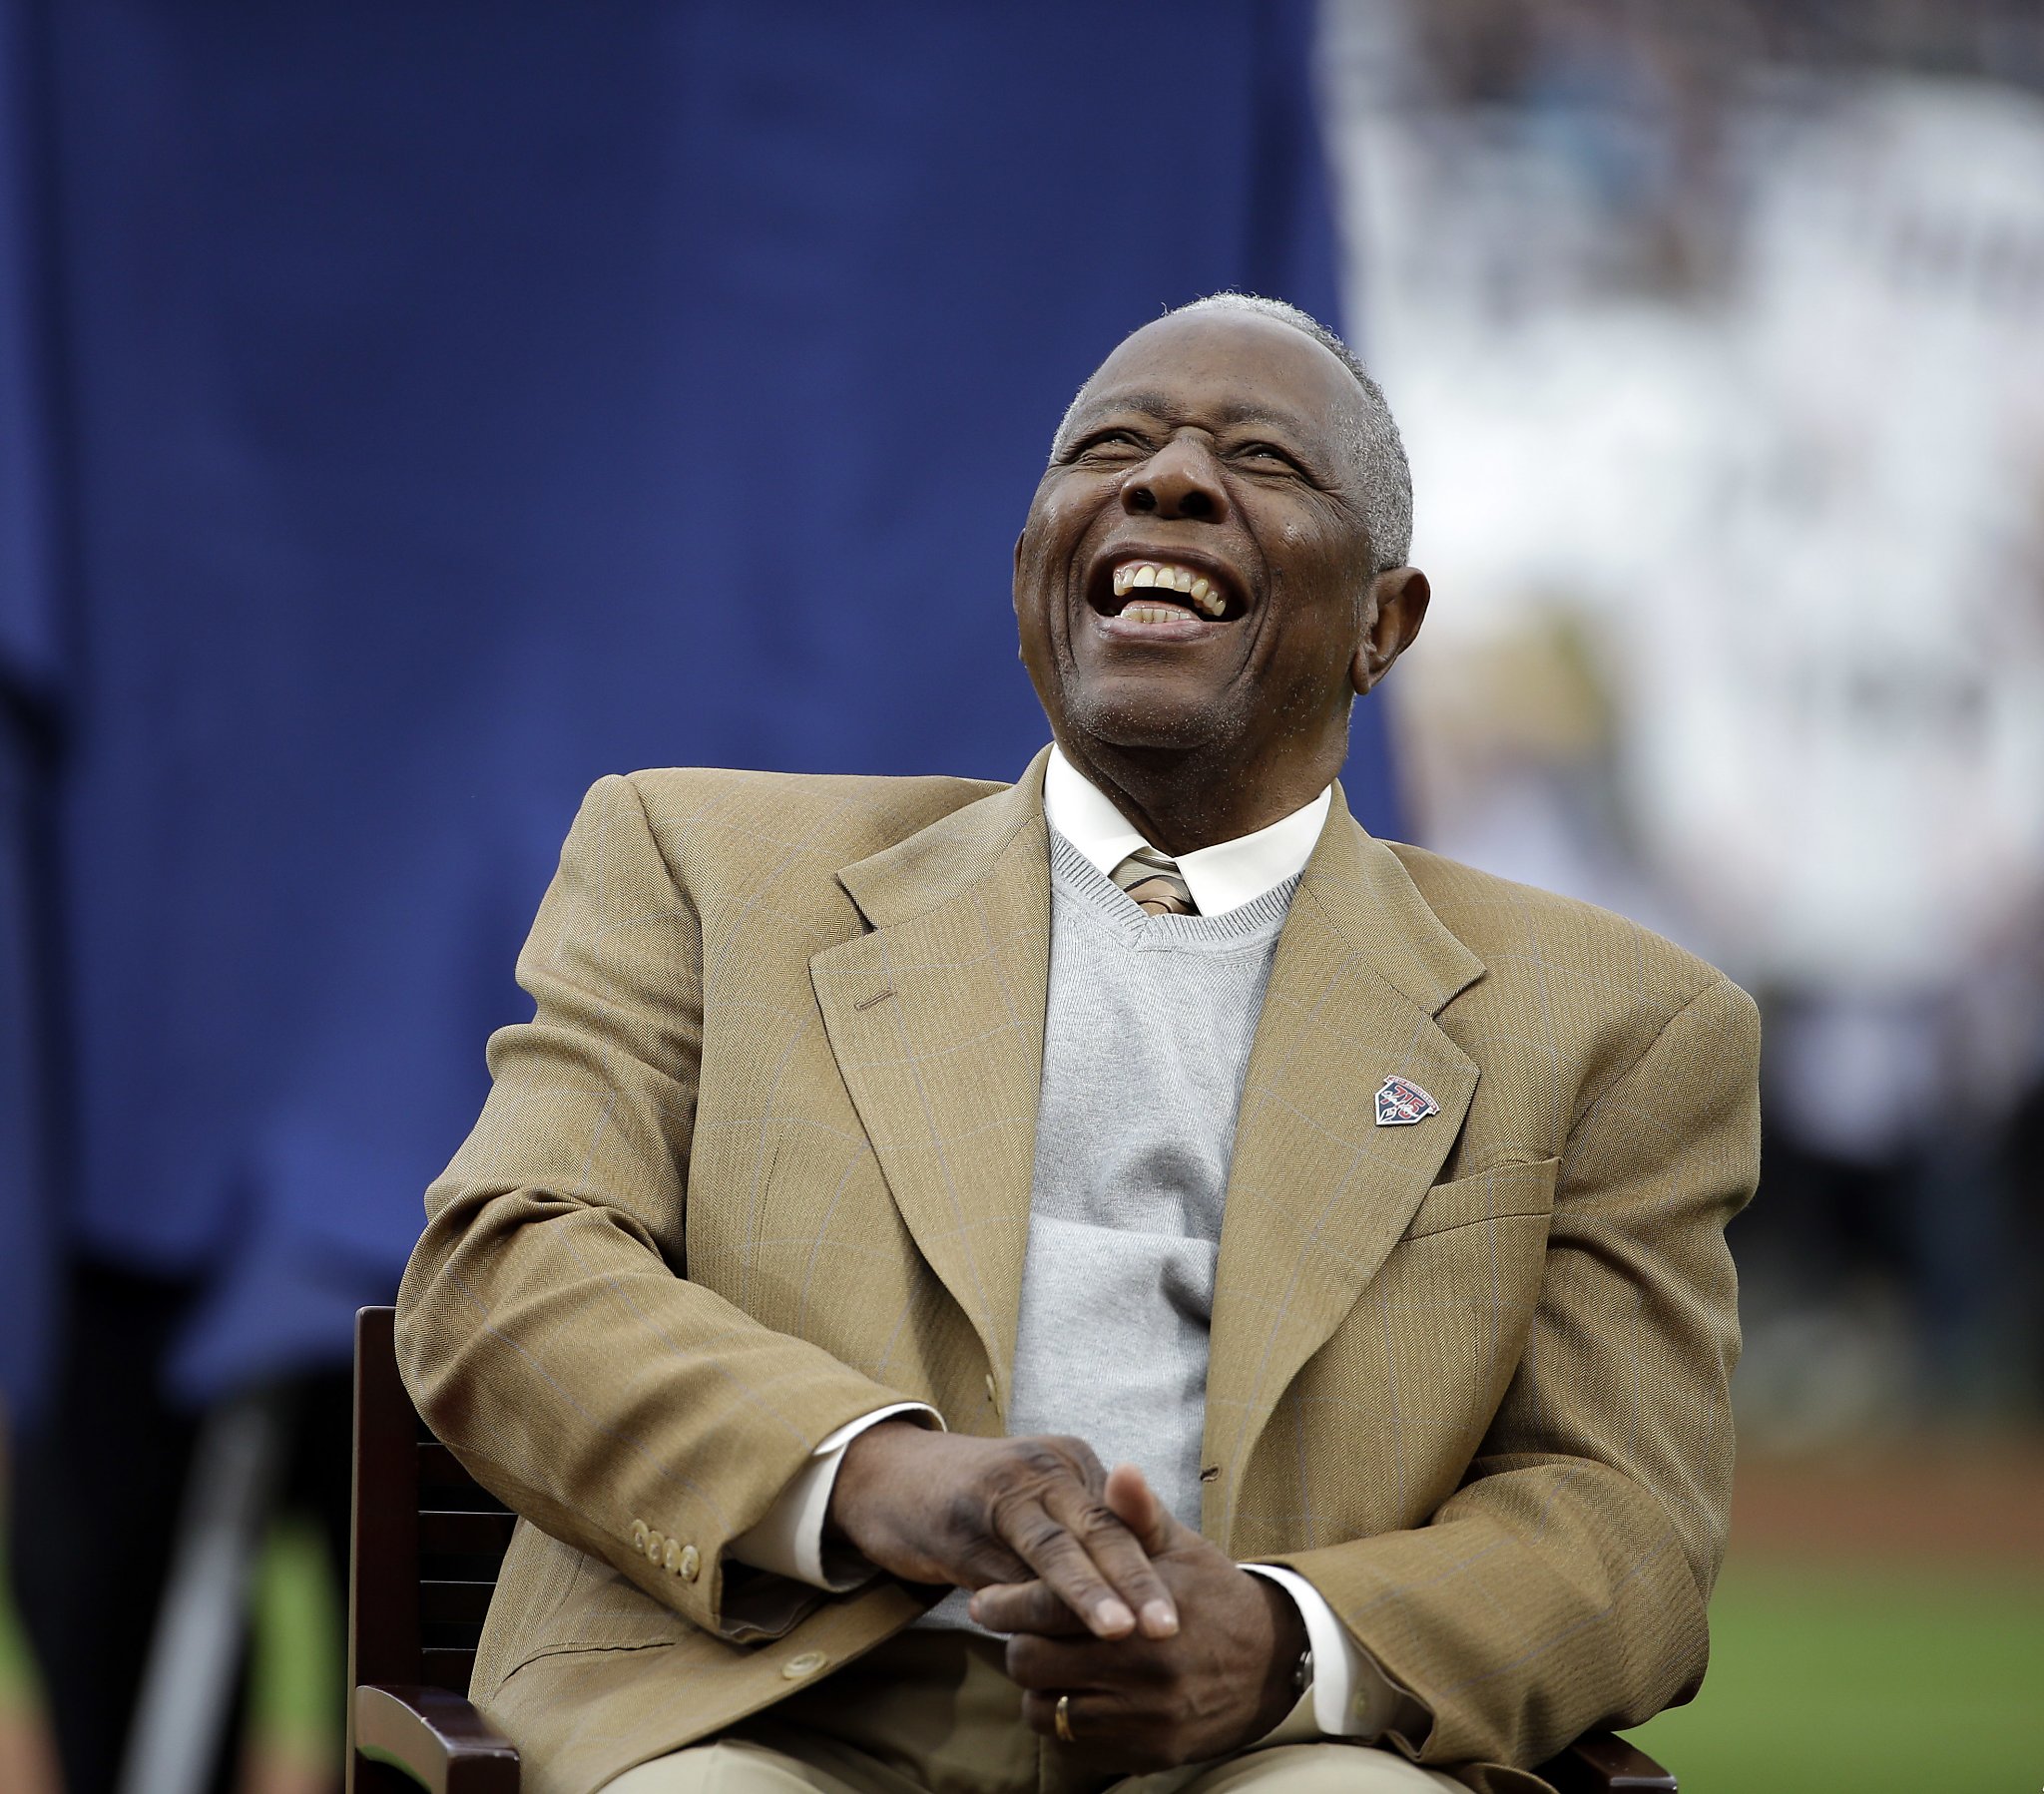 The racial barriers Hank Aaron broke and the legacy he leaves